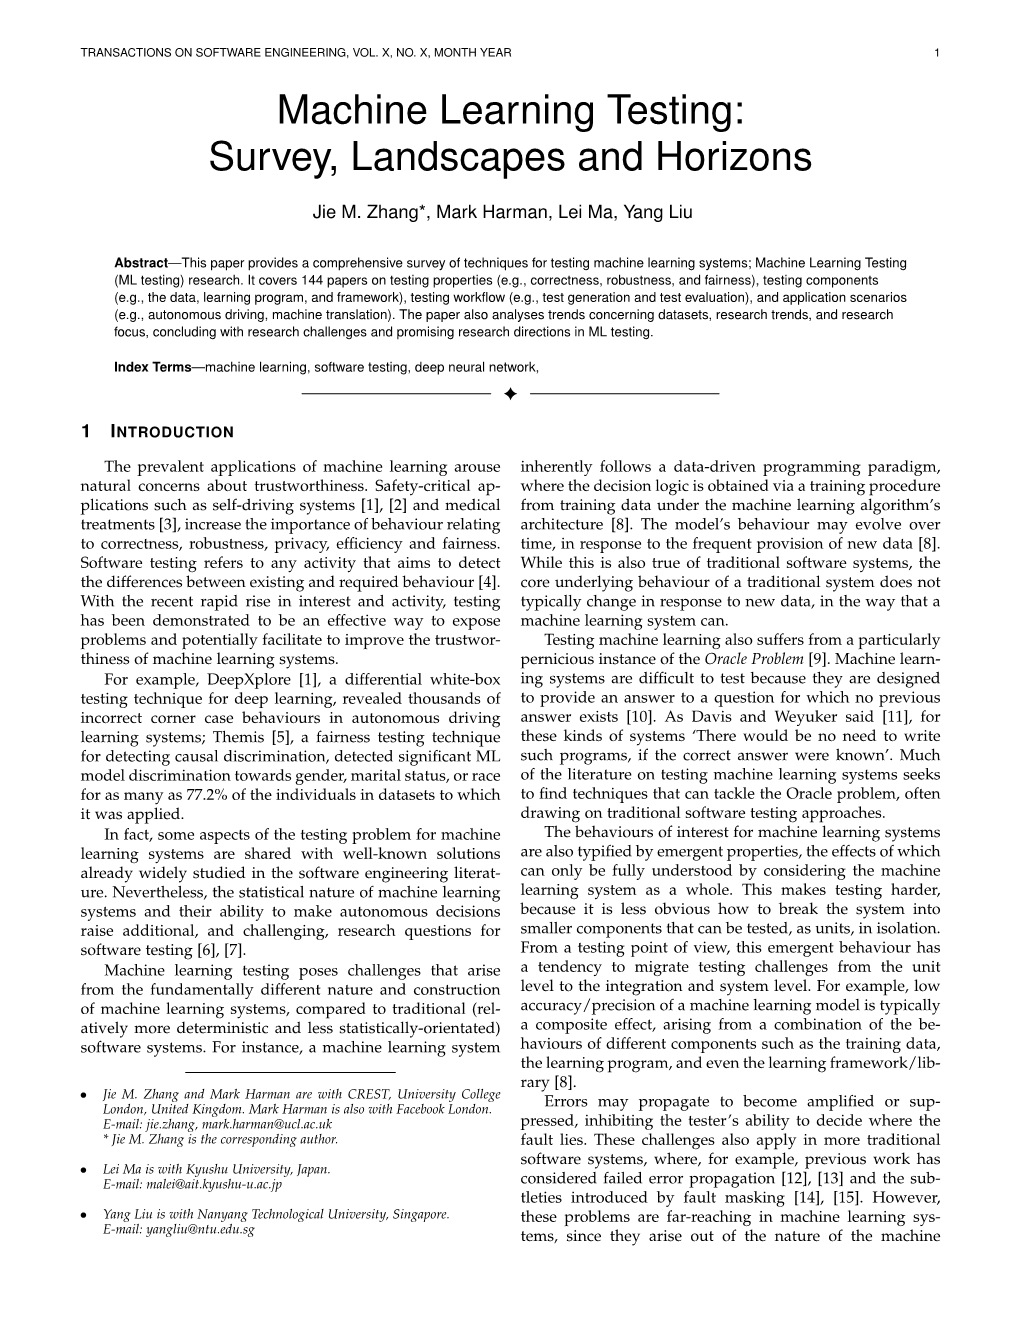 Machine Learning Testing: Survey, Landscapes and Horizons